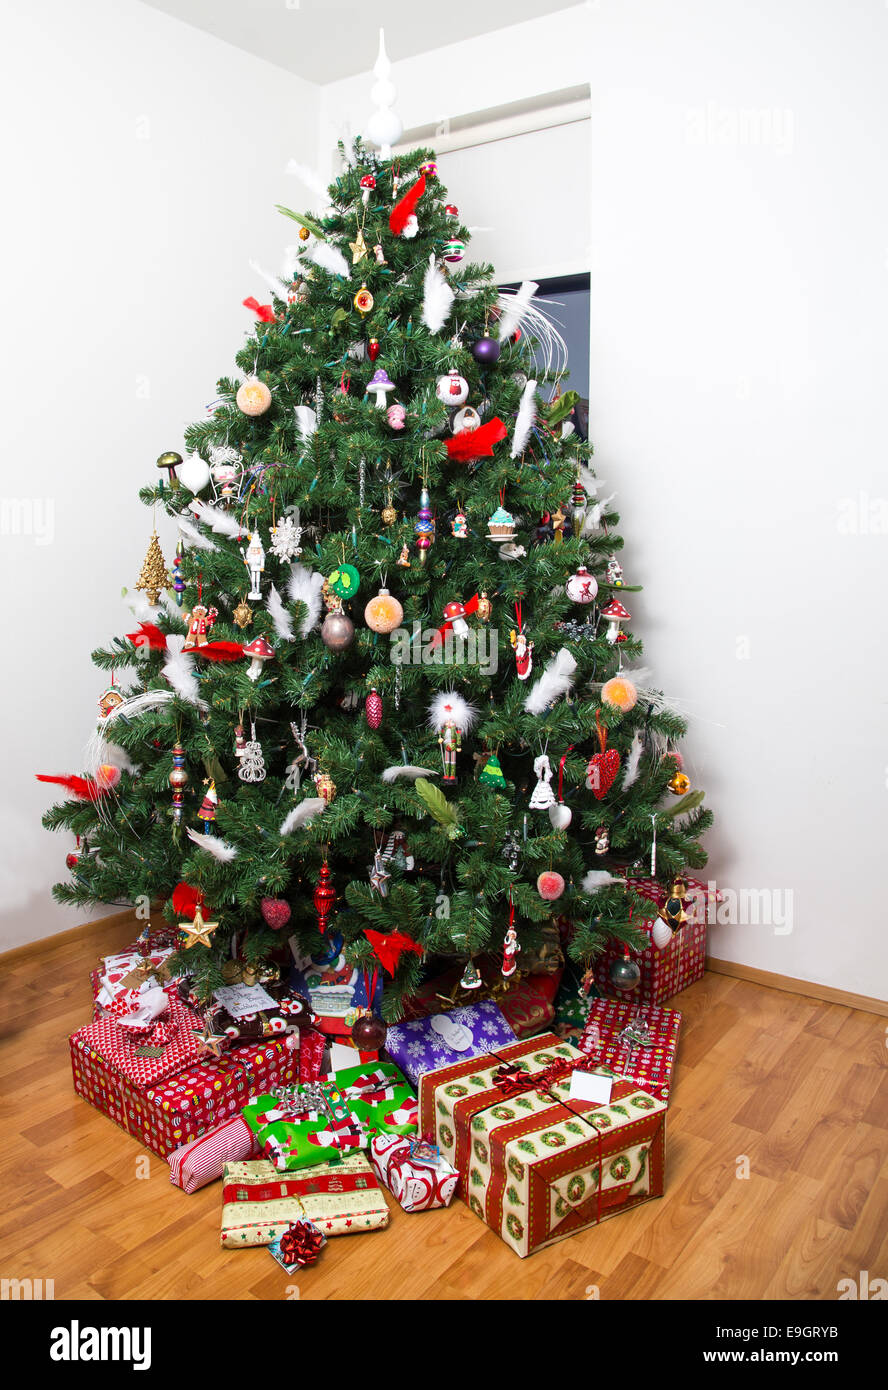 Decorated christmas tree with presents under it Stock Photo